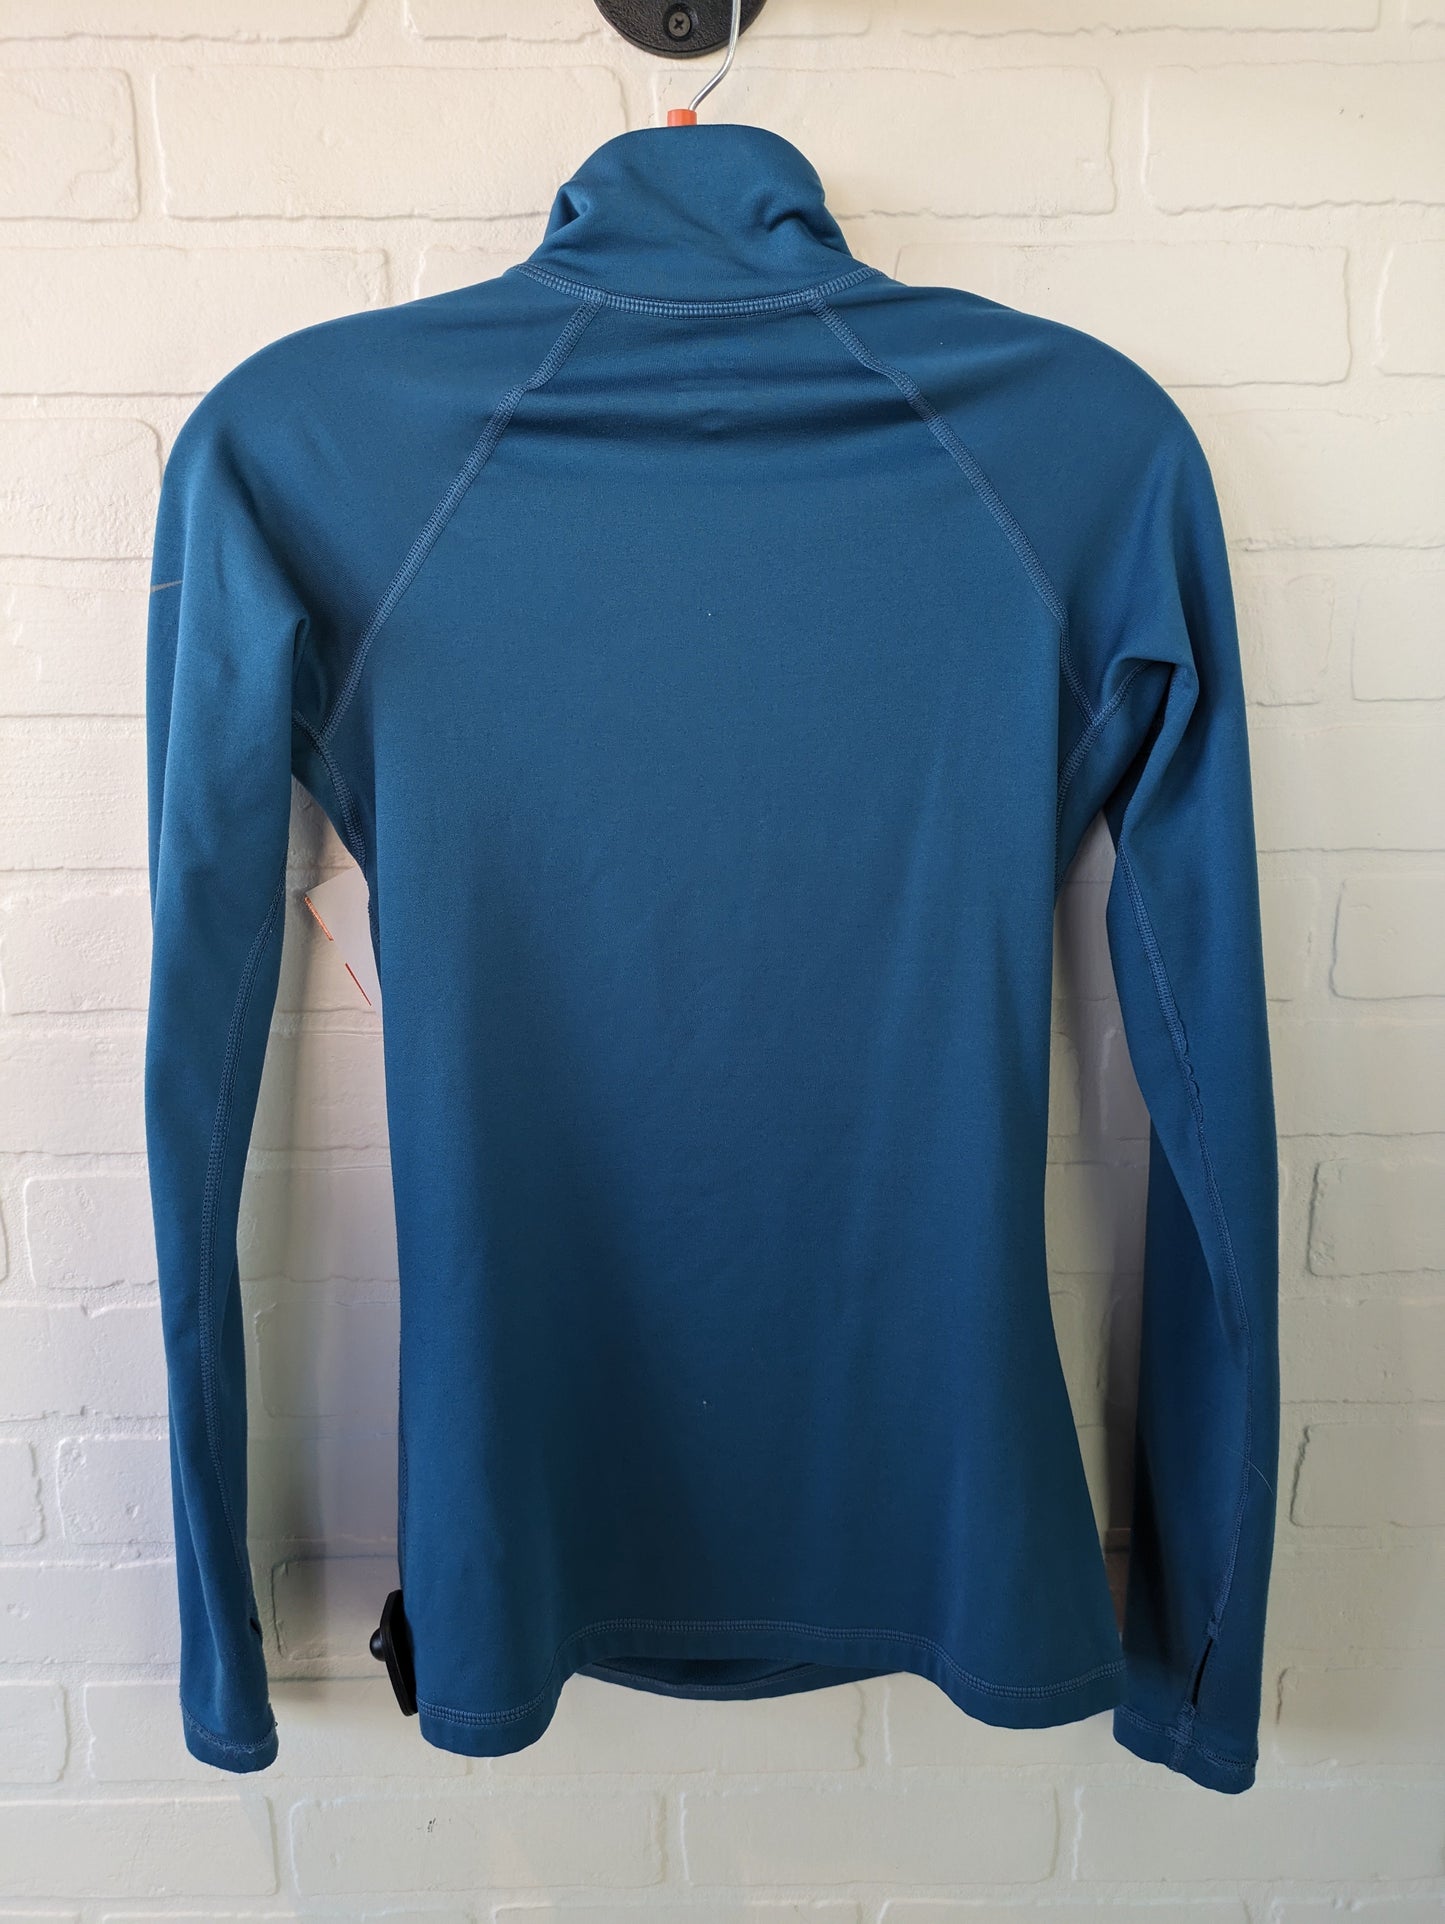 Athletic Top Long Sleeve Collar By Nike  Size: S